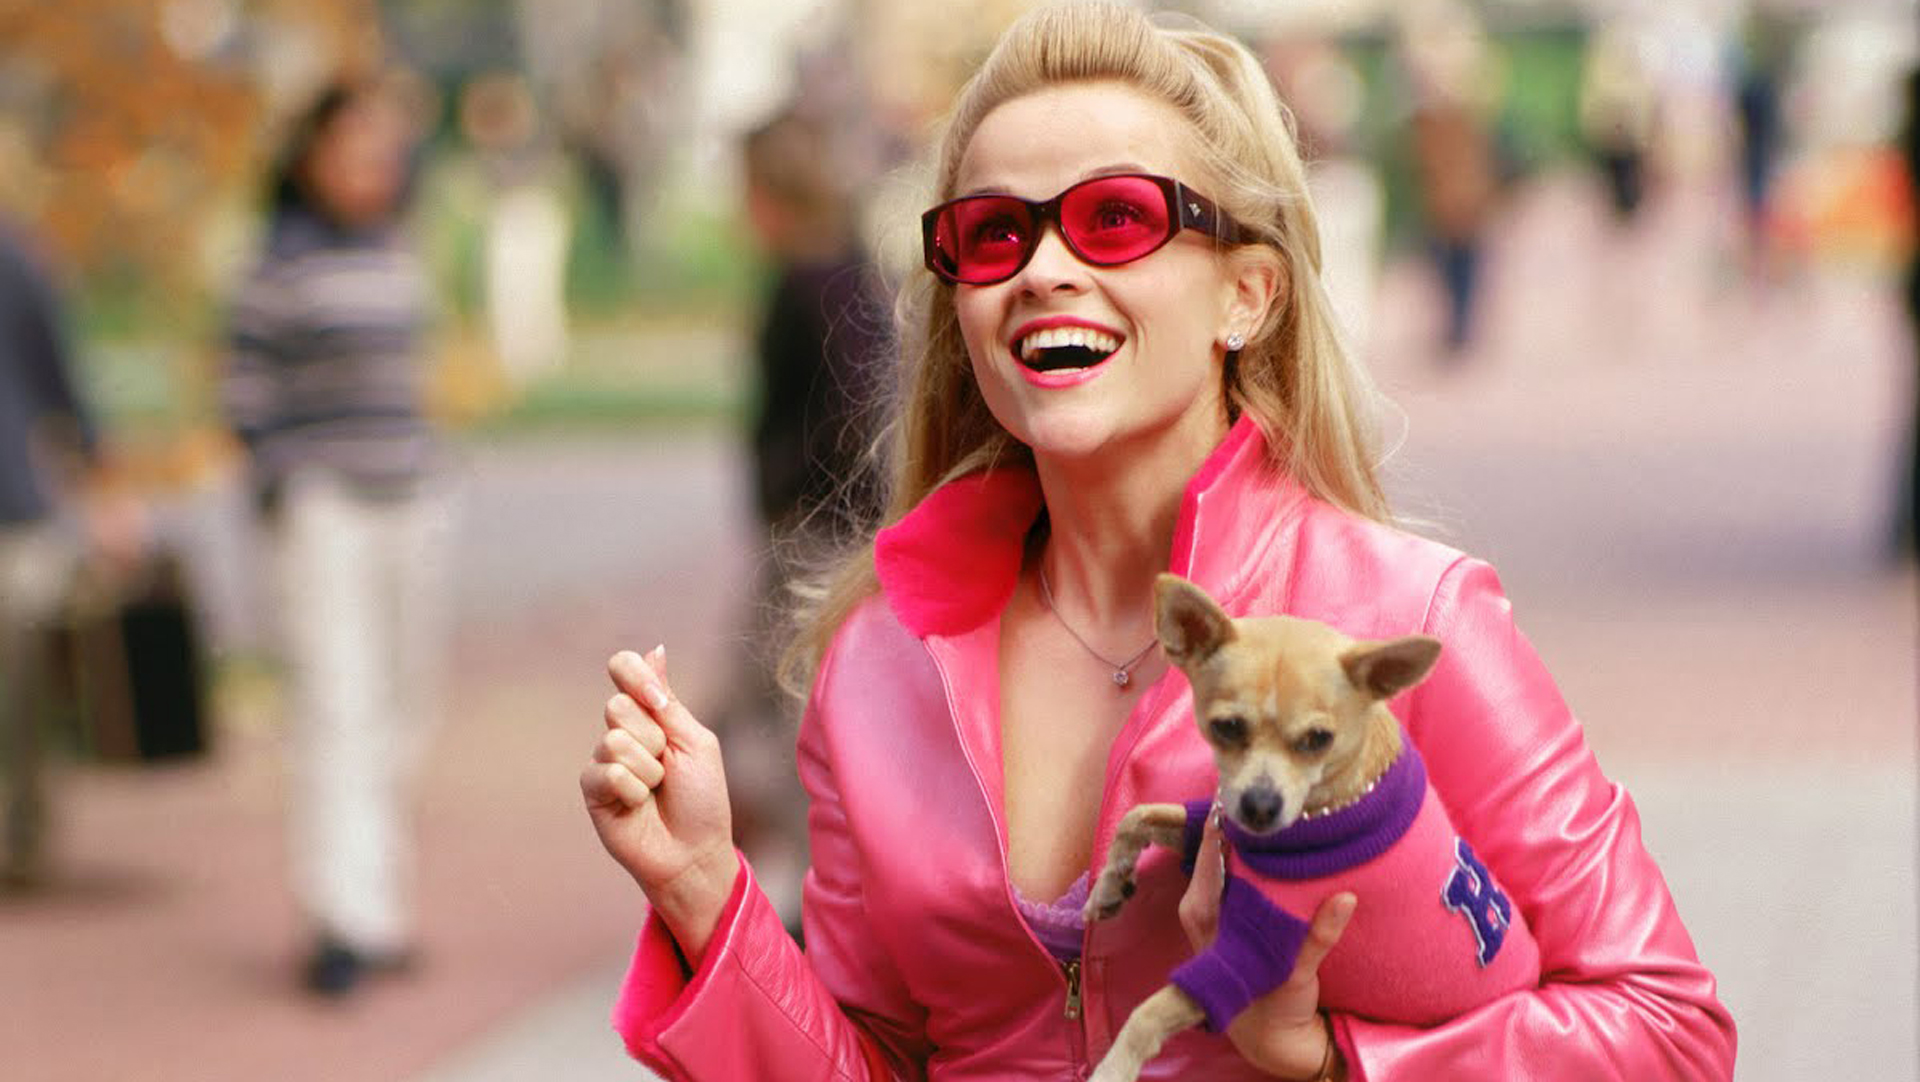 Legally blonde reese witherspoon as elle woods